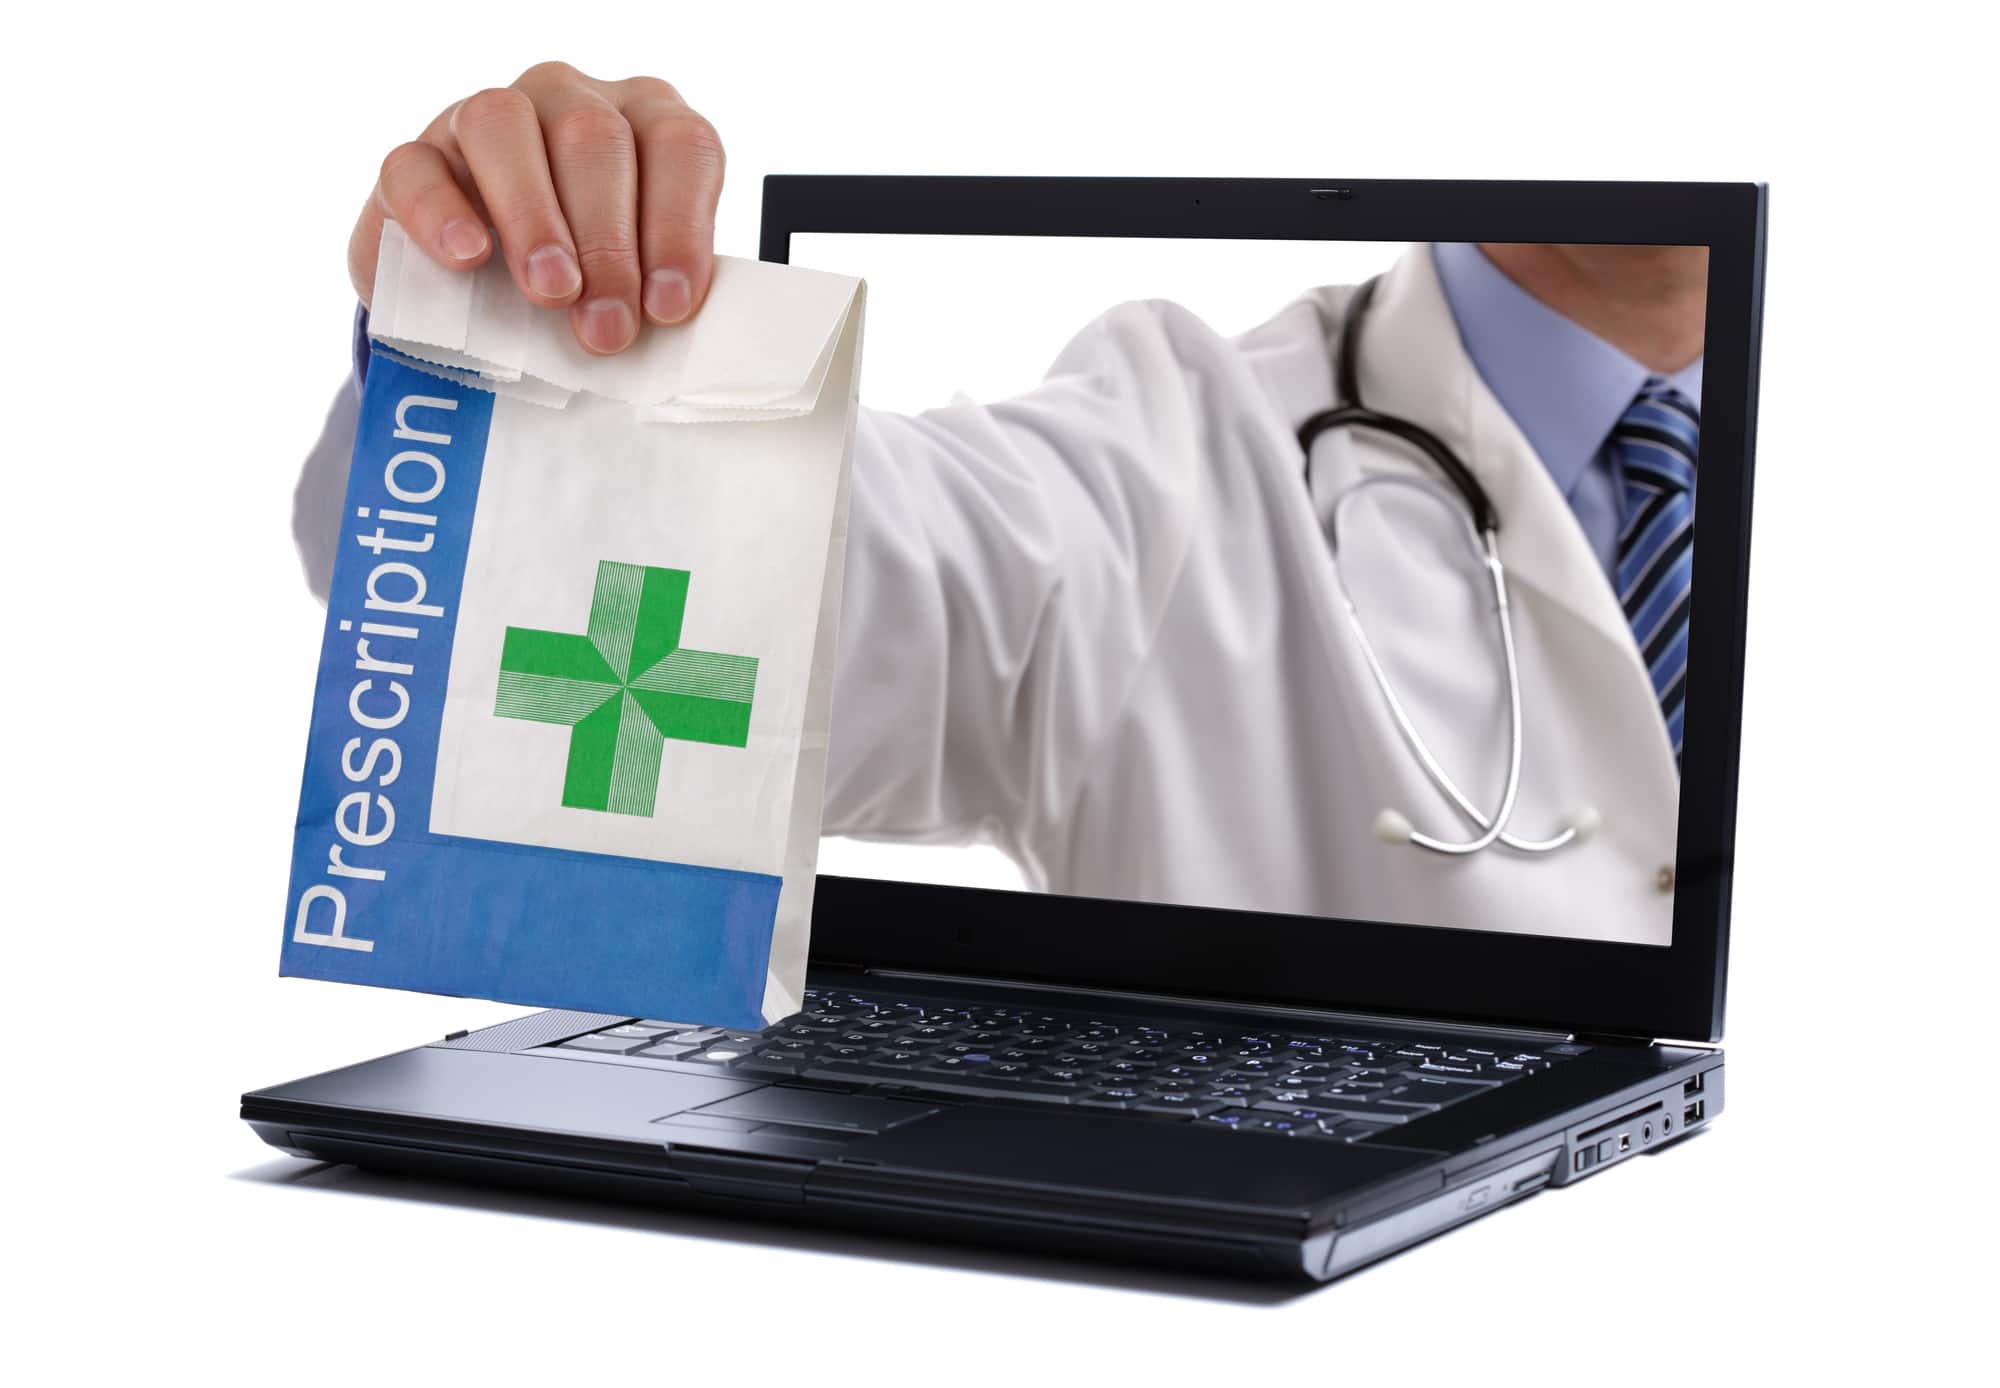 Top 10 Prescriptions To Fill At An Online Drugstore